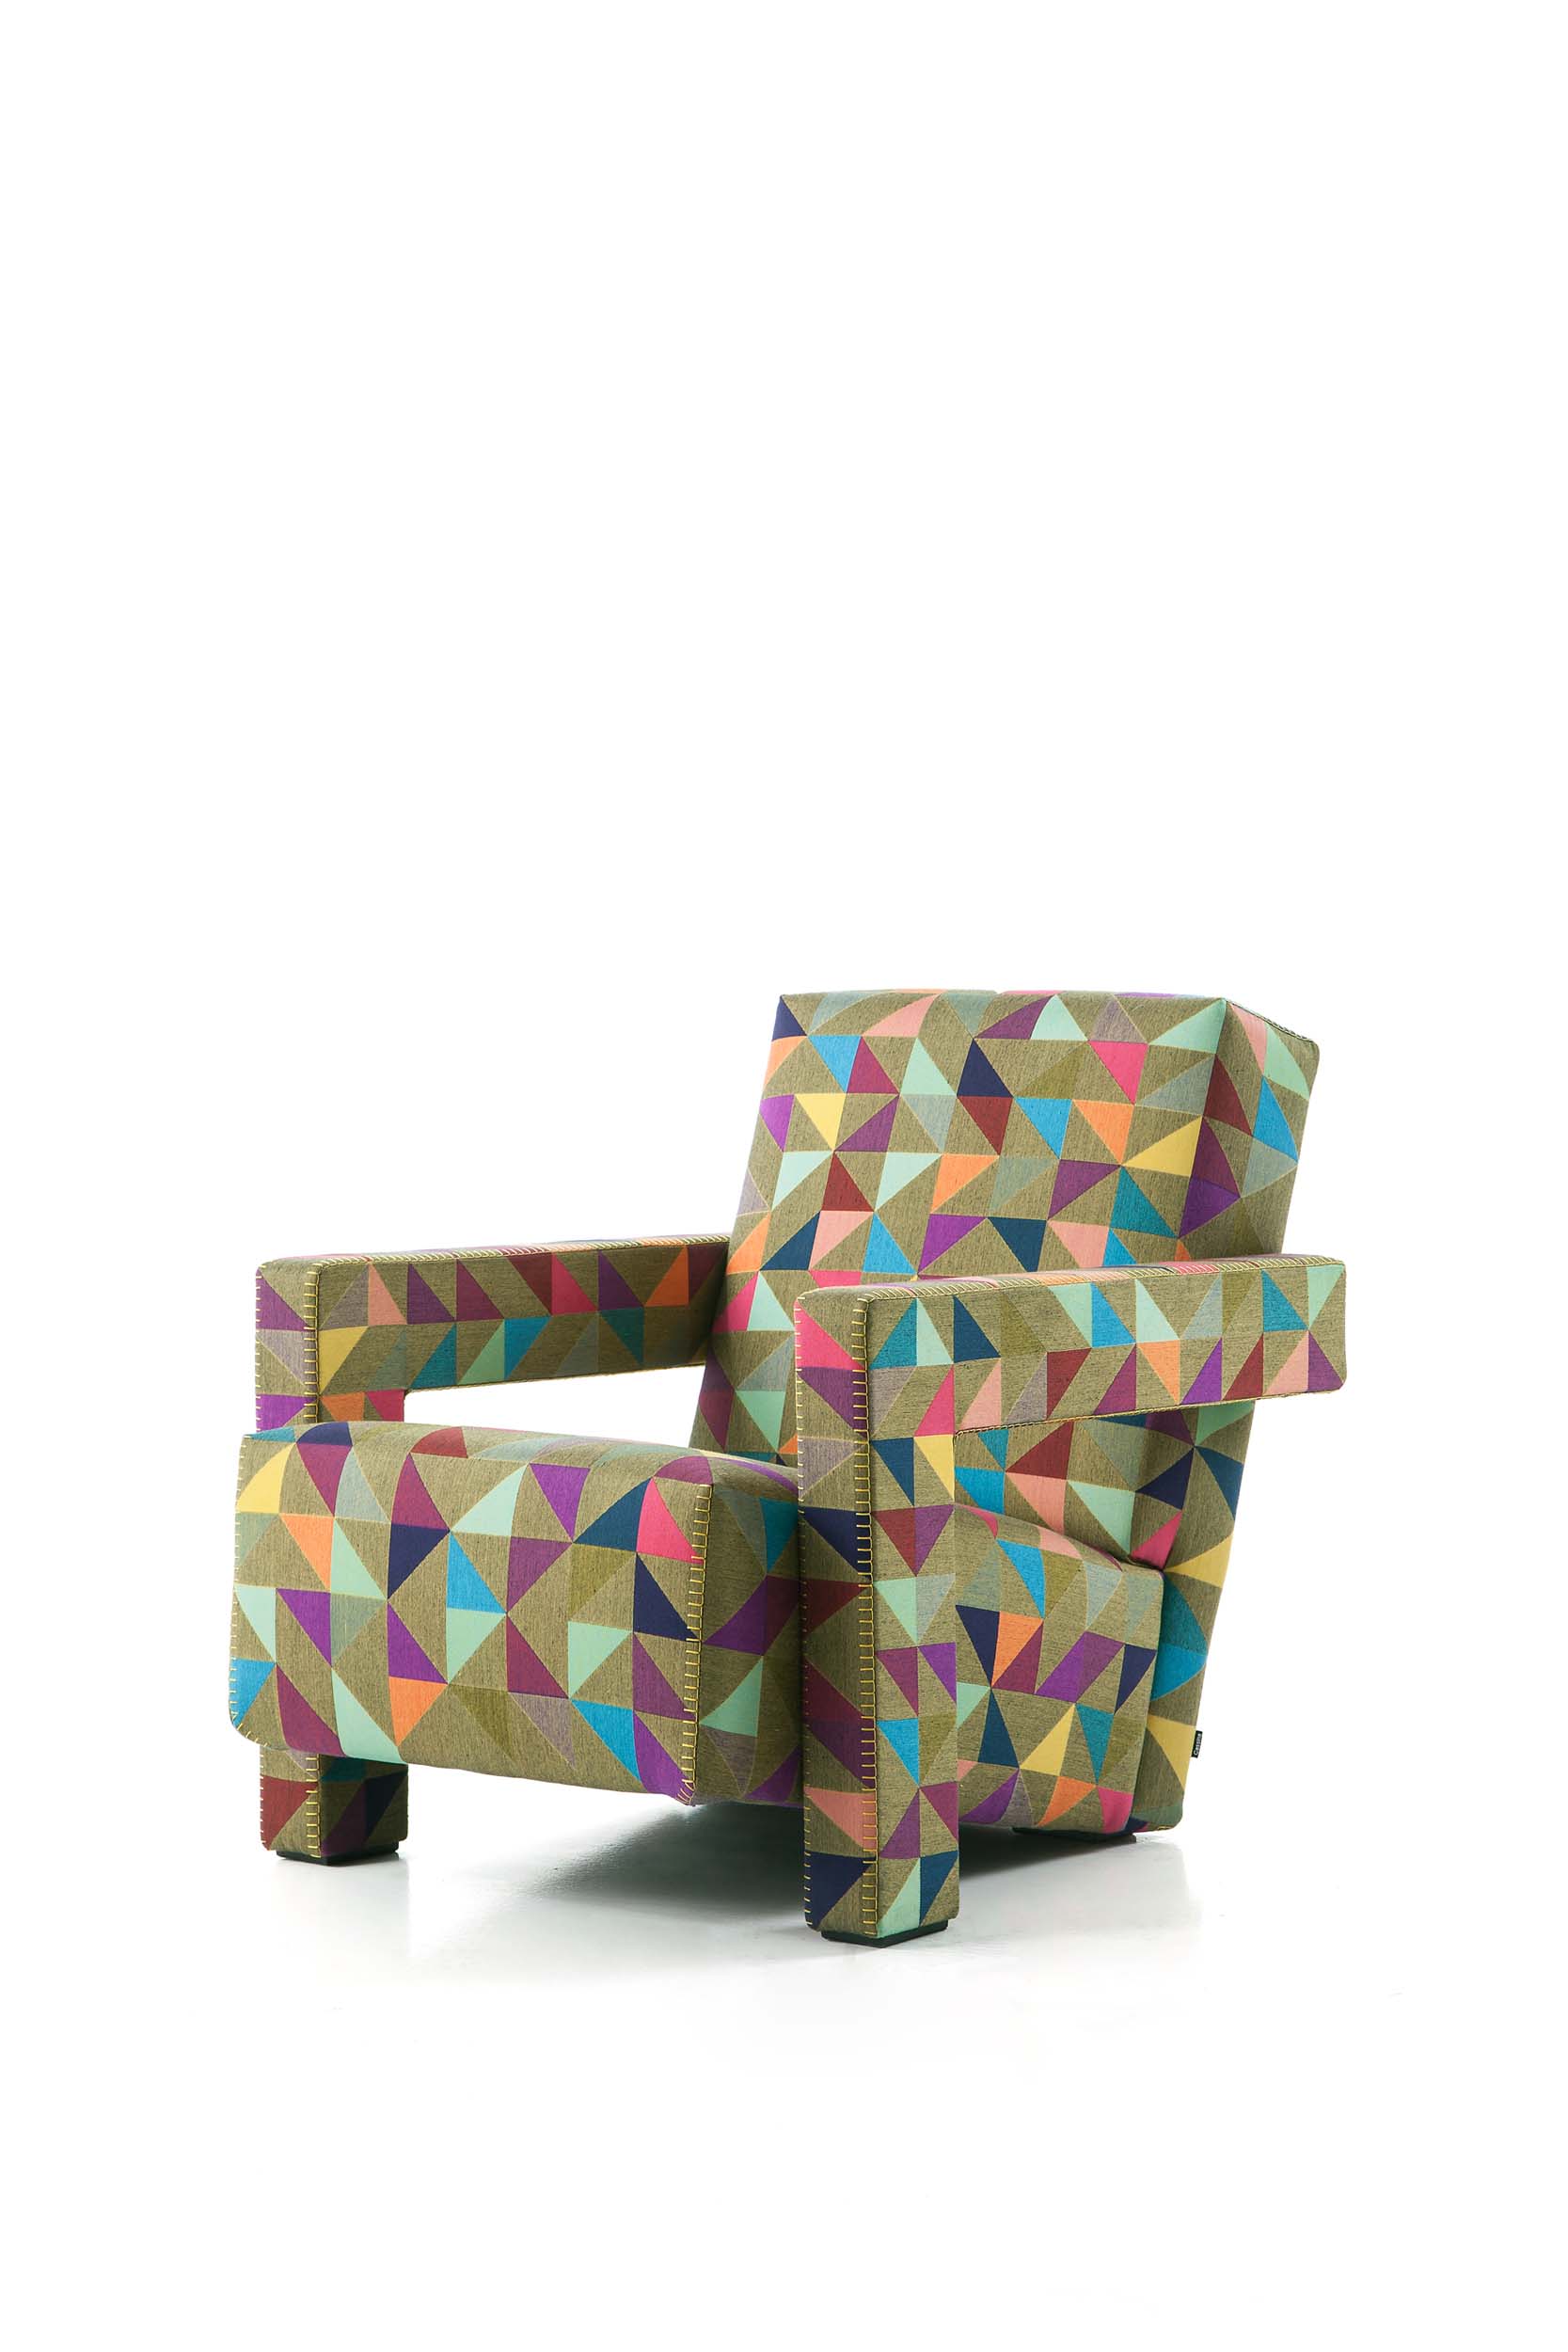 Cassina, re-released in new fabrics at Matisse, one of HOME's Style Safari destinations. 